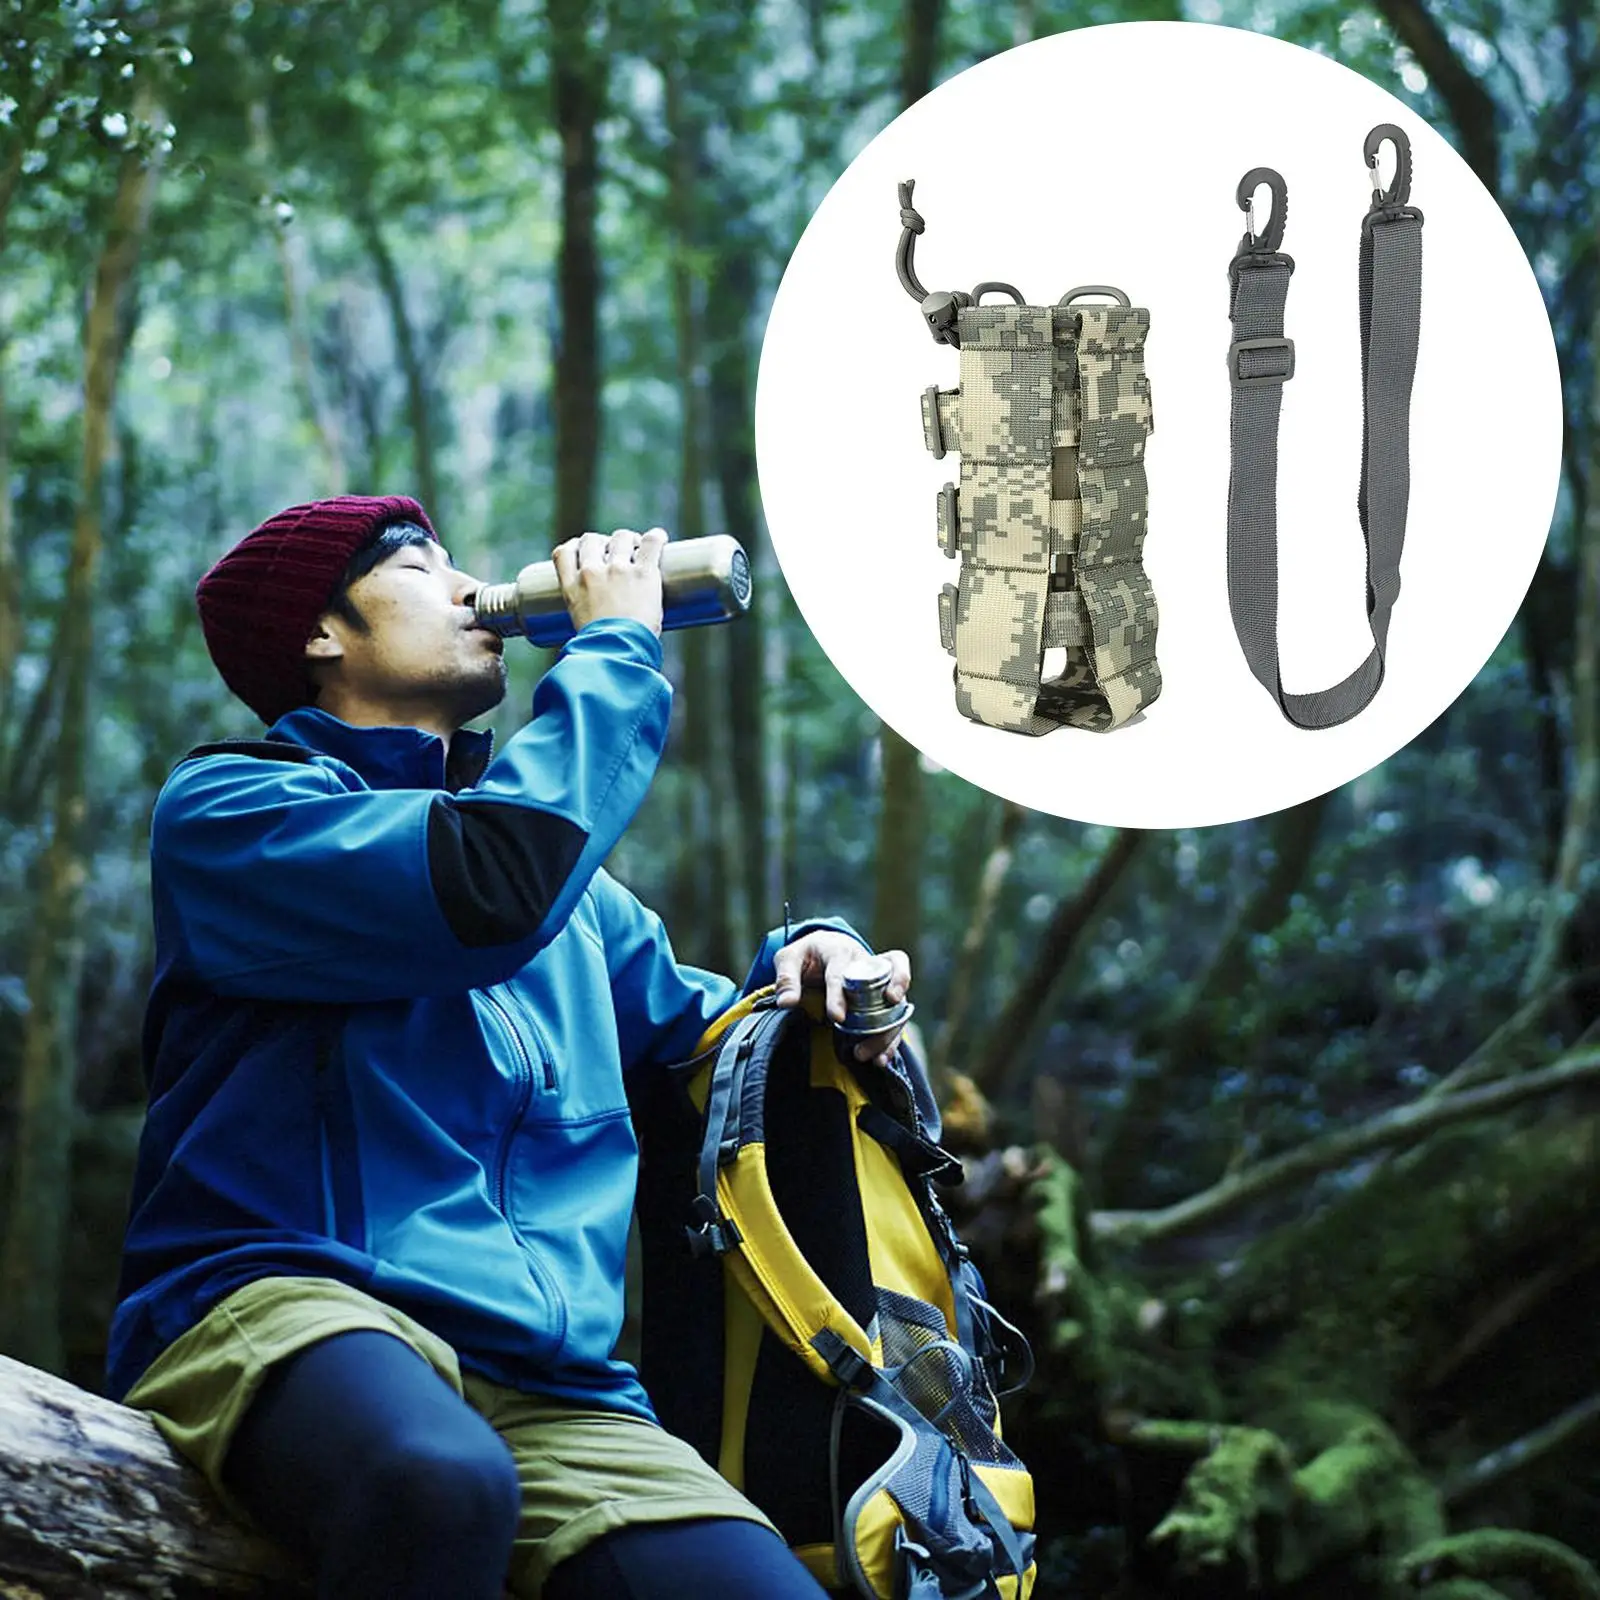  Water , Outdoor Water Bottle Holder, Carrying Case for Backpacking Hiking, Fishing, Fishing